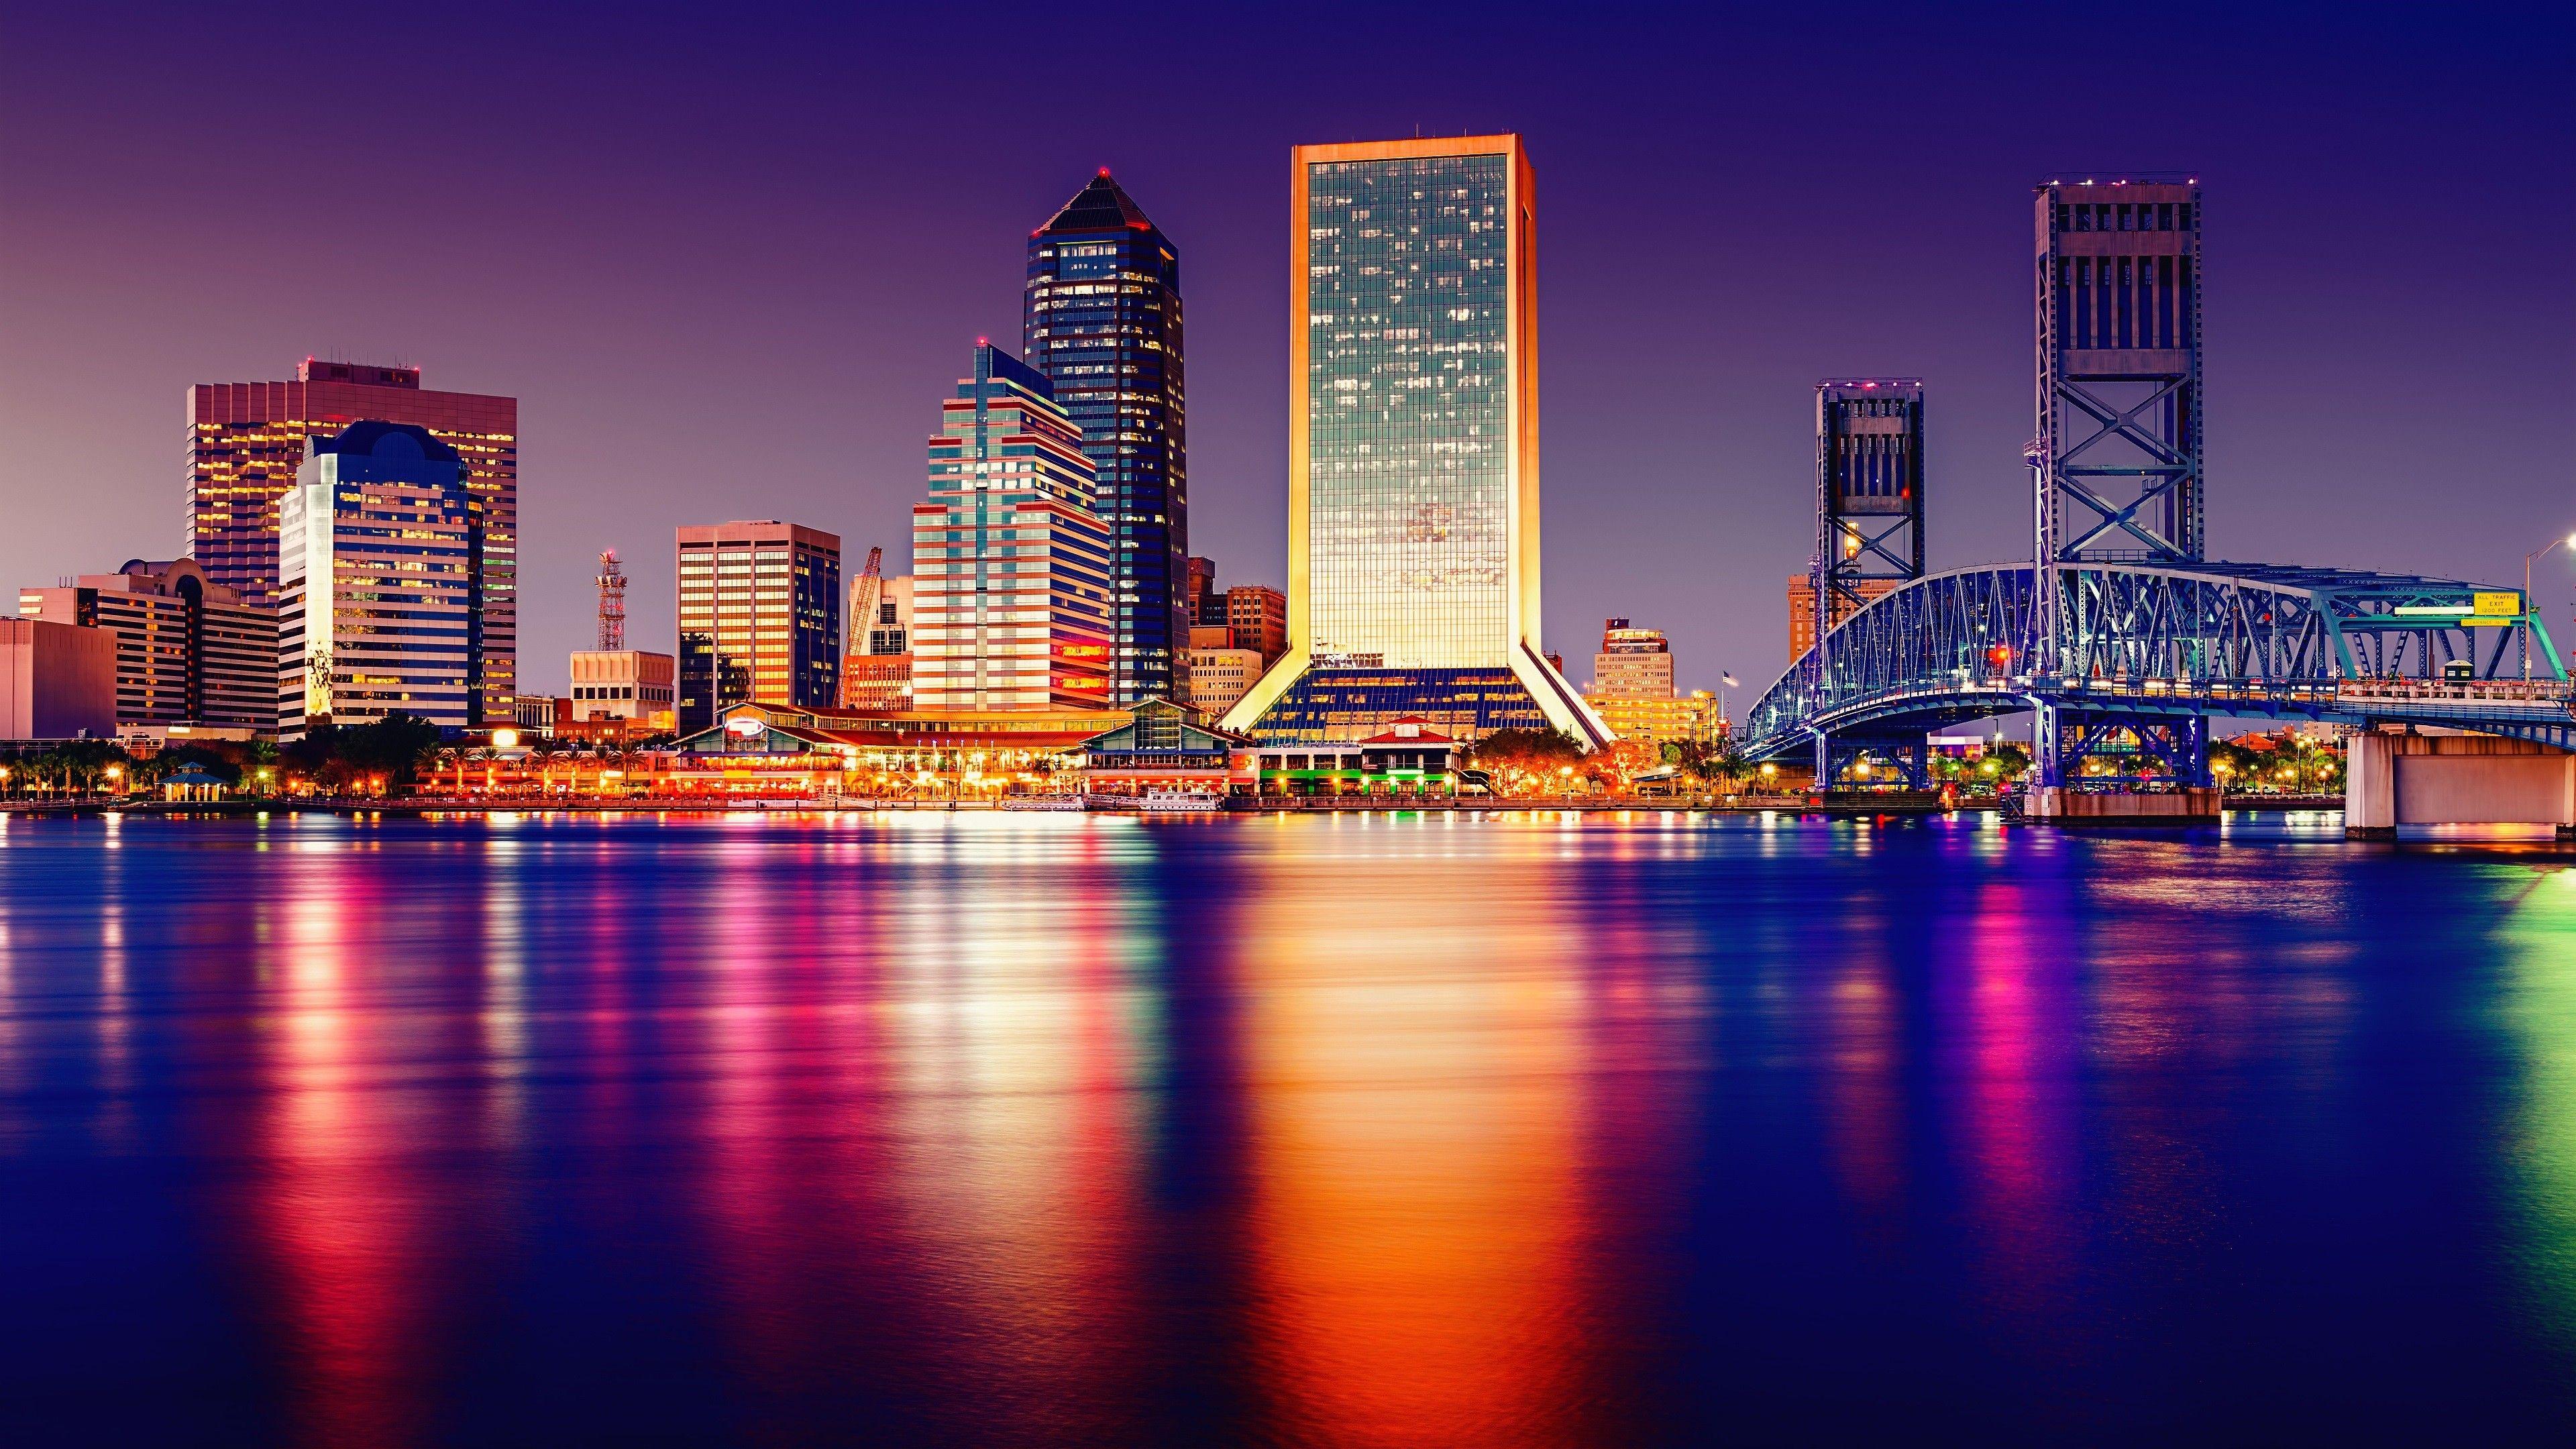 Download Tampa wallpapers for mobile phone free Tampa HD pictures